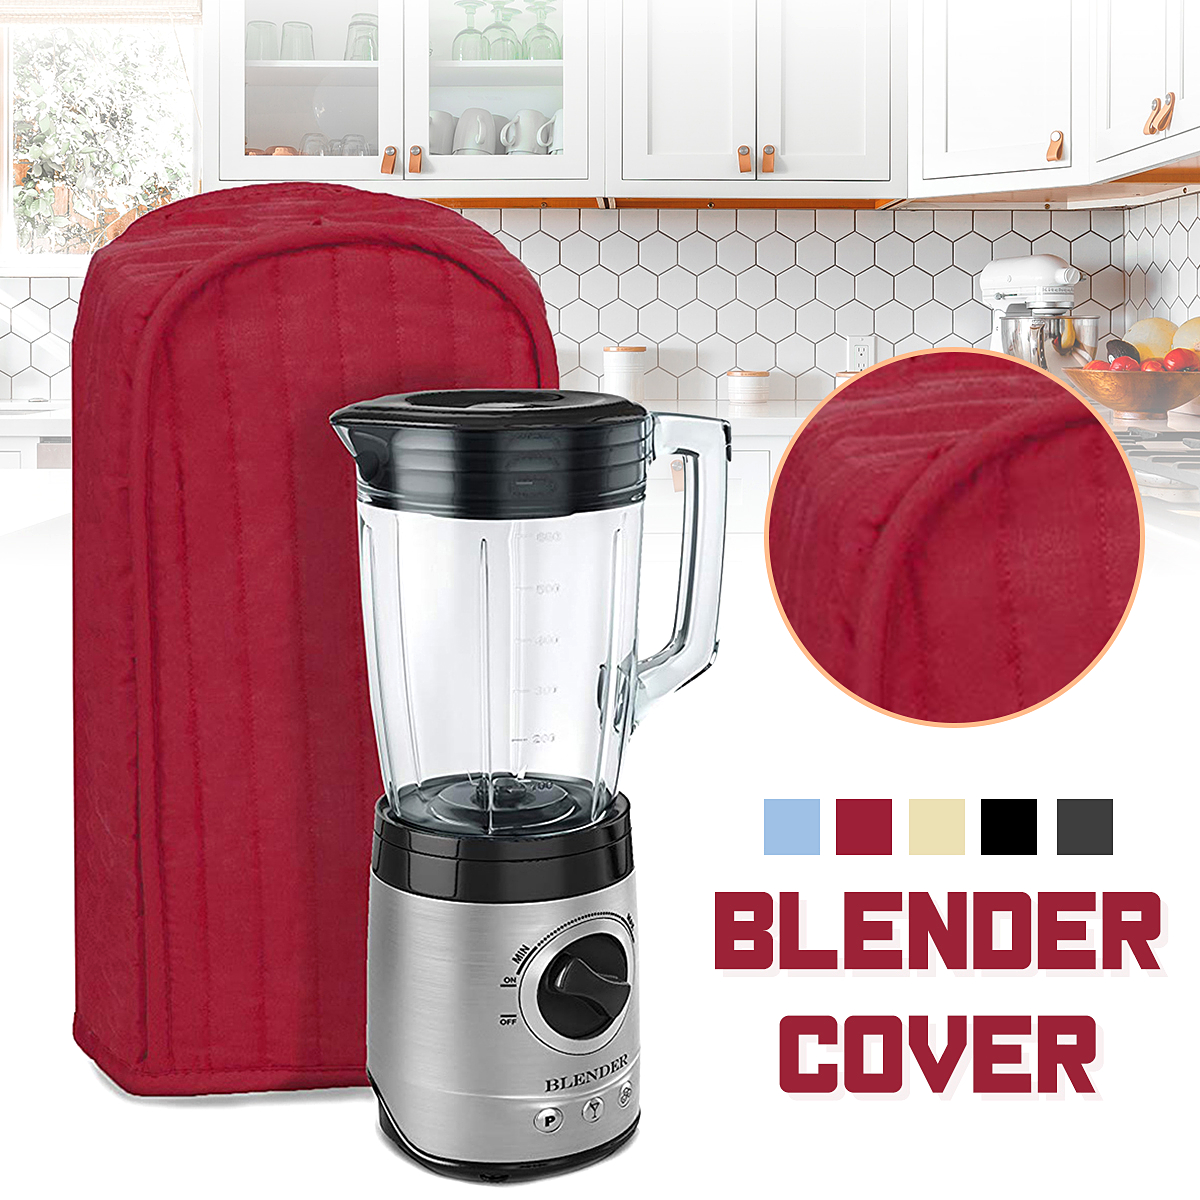 Quilted-Polyester-Kitchen-Blender-Appliance-Cover-Dust-proof-Protection-Case-Bag-1568082-1